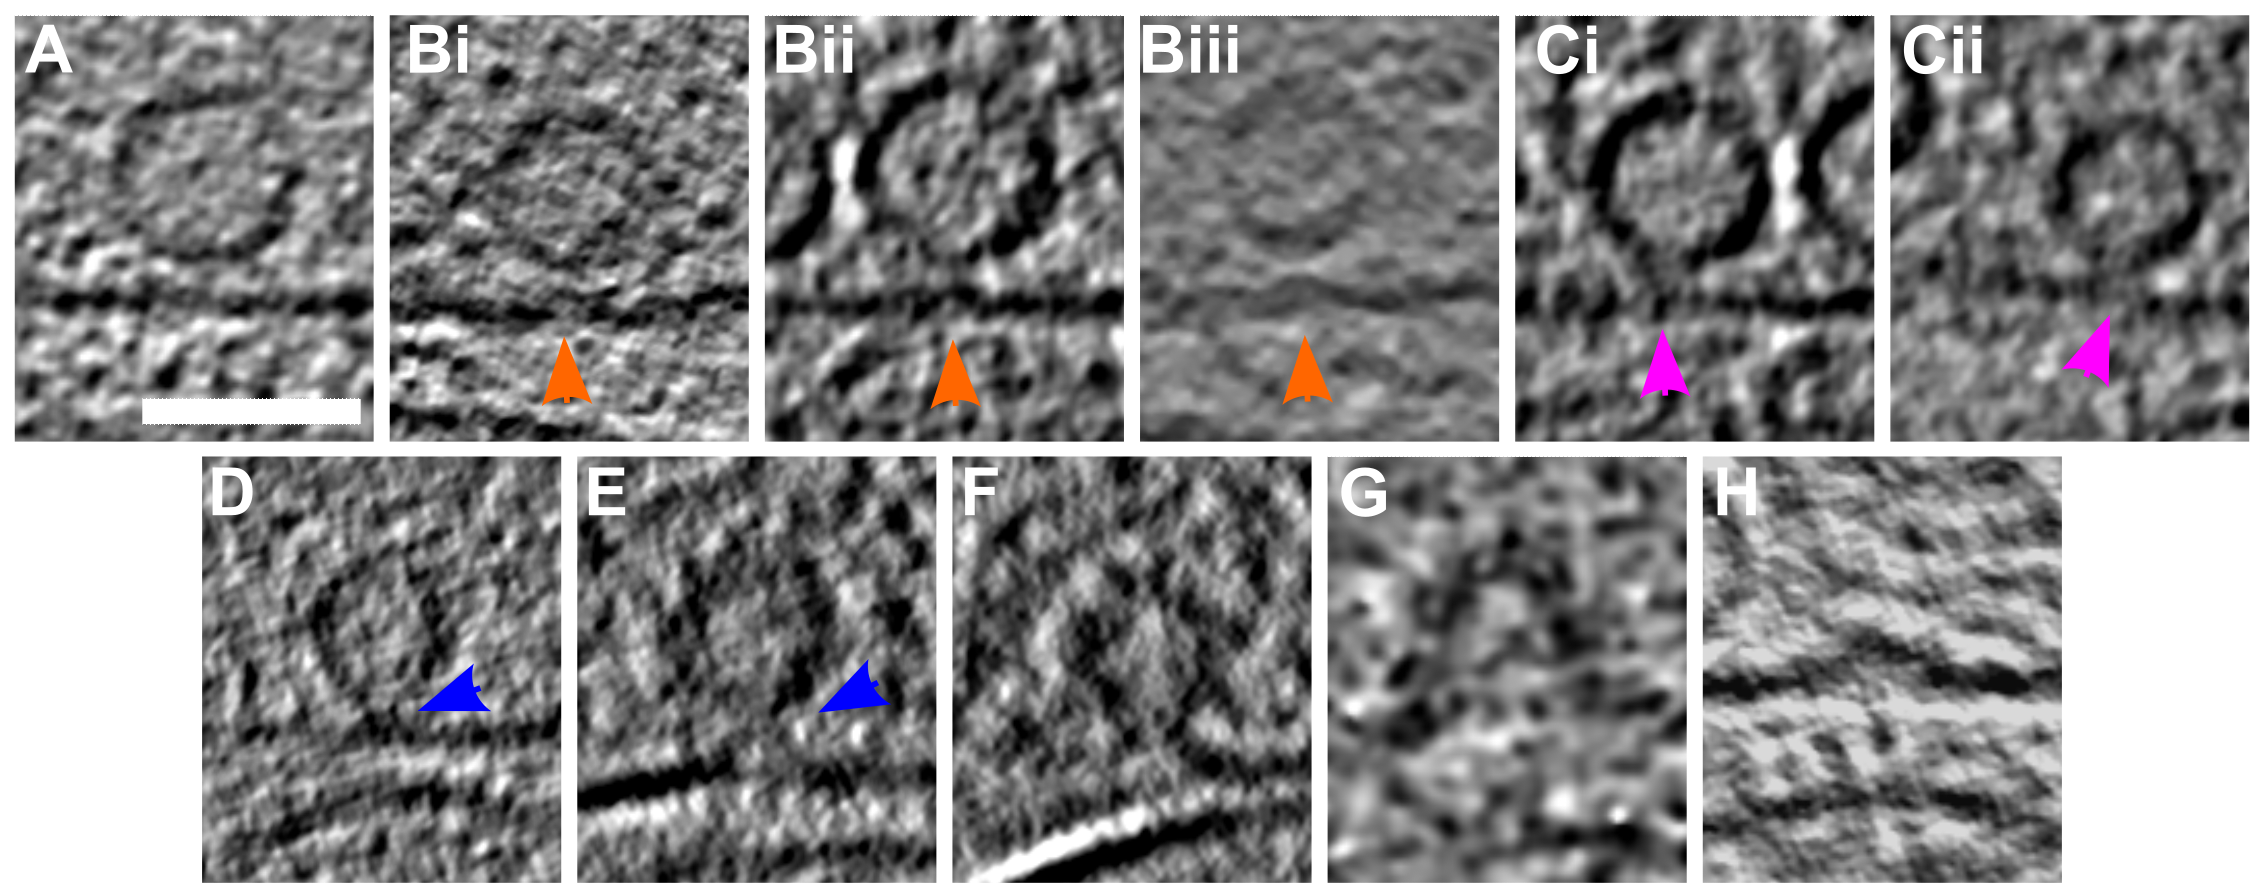 Figure 3: SV exocytosis morphology. Tomographic slice of non-stimulated (A) and stimulated rat synaptosomes (B-H). A) Image of a 2.2-nm thick tomographic slice showing a non-stimulated with SVs at the AZ and a straight PM. B1) Membrane curvature event, 2.2-nm thick tomographic slice. B2) Membrane curvature event, 6.5-nm thick tomographic slice. B3) Membrane curvature event, 2.24 nm thick tomographic slice. Orange arrows showing membrane curvature event. C1,C2) Lipid perturbations of PM and SV, 22-nm thick tomographic slices. The space between SV and PM is denser than in the non-stimulated synaptosomes (see pink arrow). D-F) Vesicles with a pore opening that might be on the way to full collapse fusion, 33-nm thick tomographic slice thickness: 22 nm (D), 30.8 (E), 33 nm (F). G) Wide pore opening, most likely on the way to full collapse fusion, 2.2-nm tomographic slice. H) Remaining bump at the end of full collapse fusion, 11-nm thick tomographic slice. Scale bar, 50 nm. Total number of observations of each type of exocytosis events: B, 8; C, 3; D, 3; E, 2; F, 3; G, 1; H, 14. Events of type B to E were classified as early, while events of type F to H were classified as late.